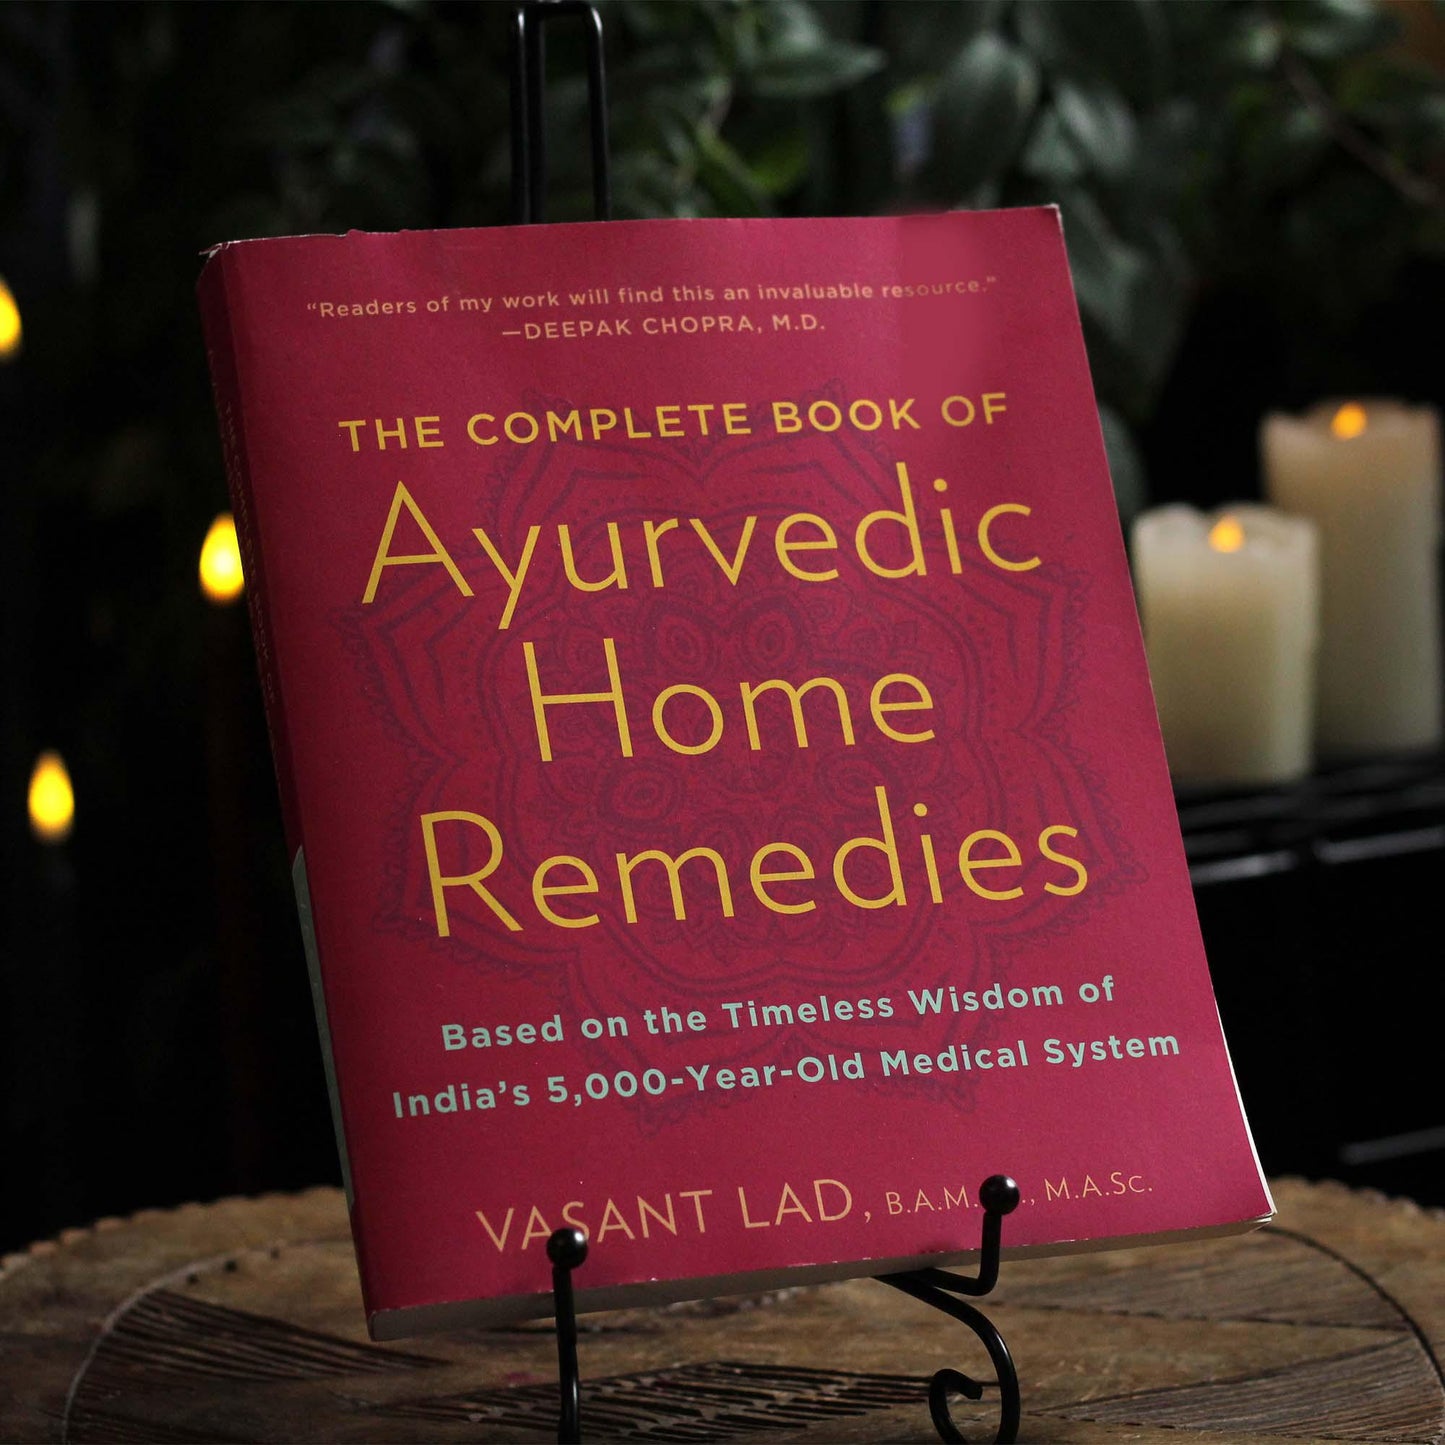 COMPLETE BOOK OF AYURVEDIC HOME REMEDIES